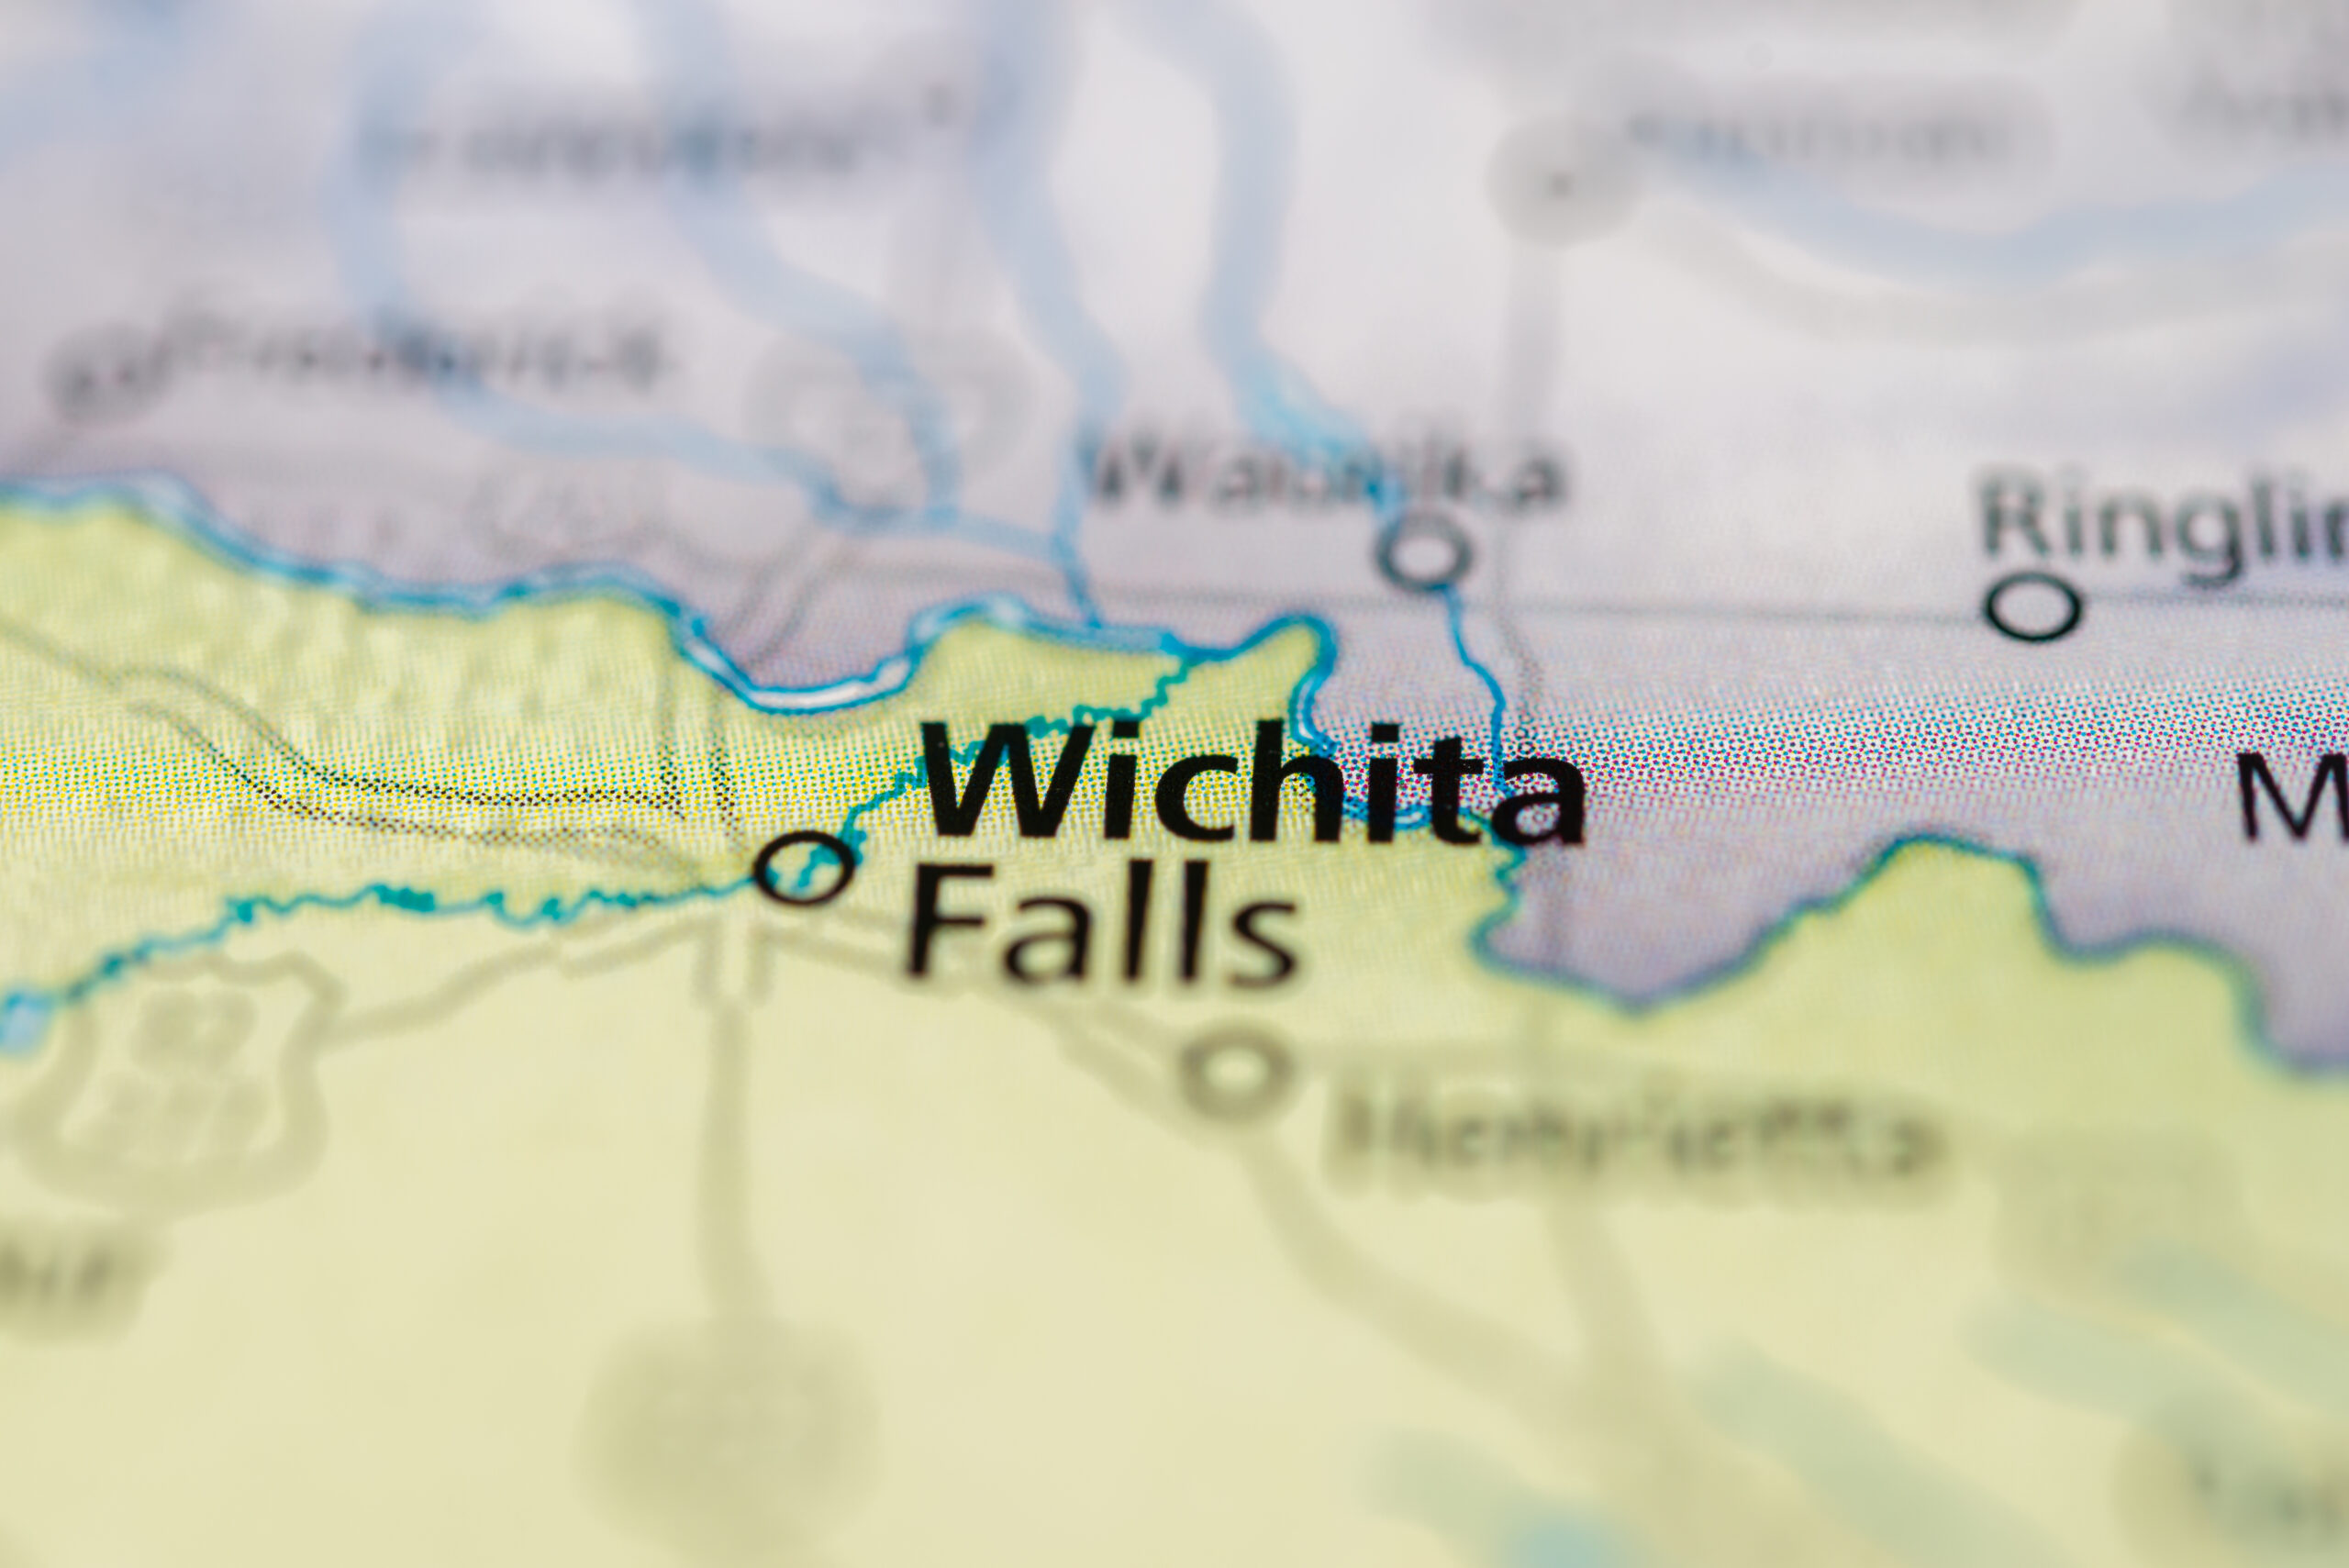 Close-up of a map showing the location of Wichita Falls, highlighted with a blue marker for divorce lawyers.